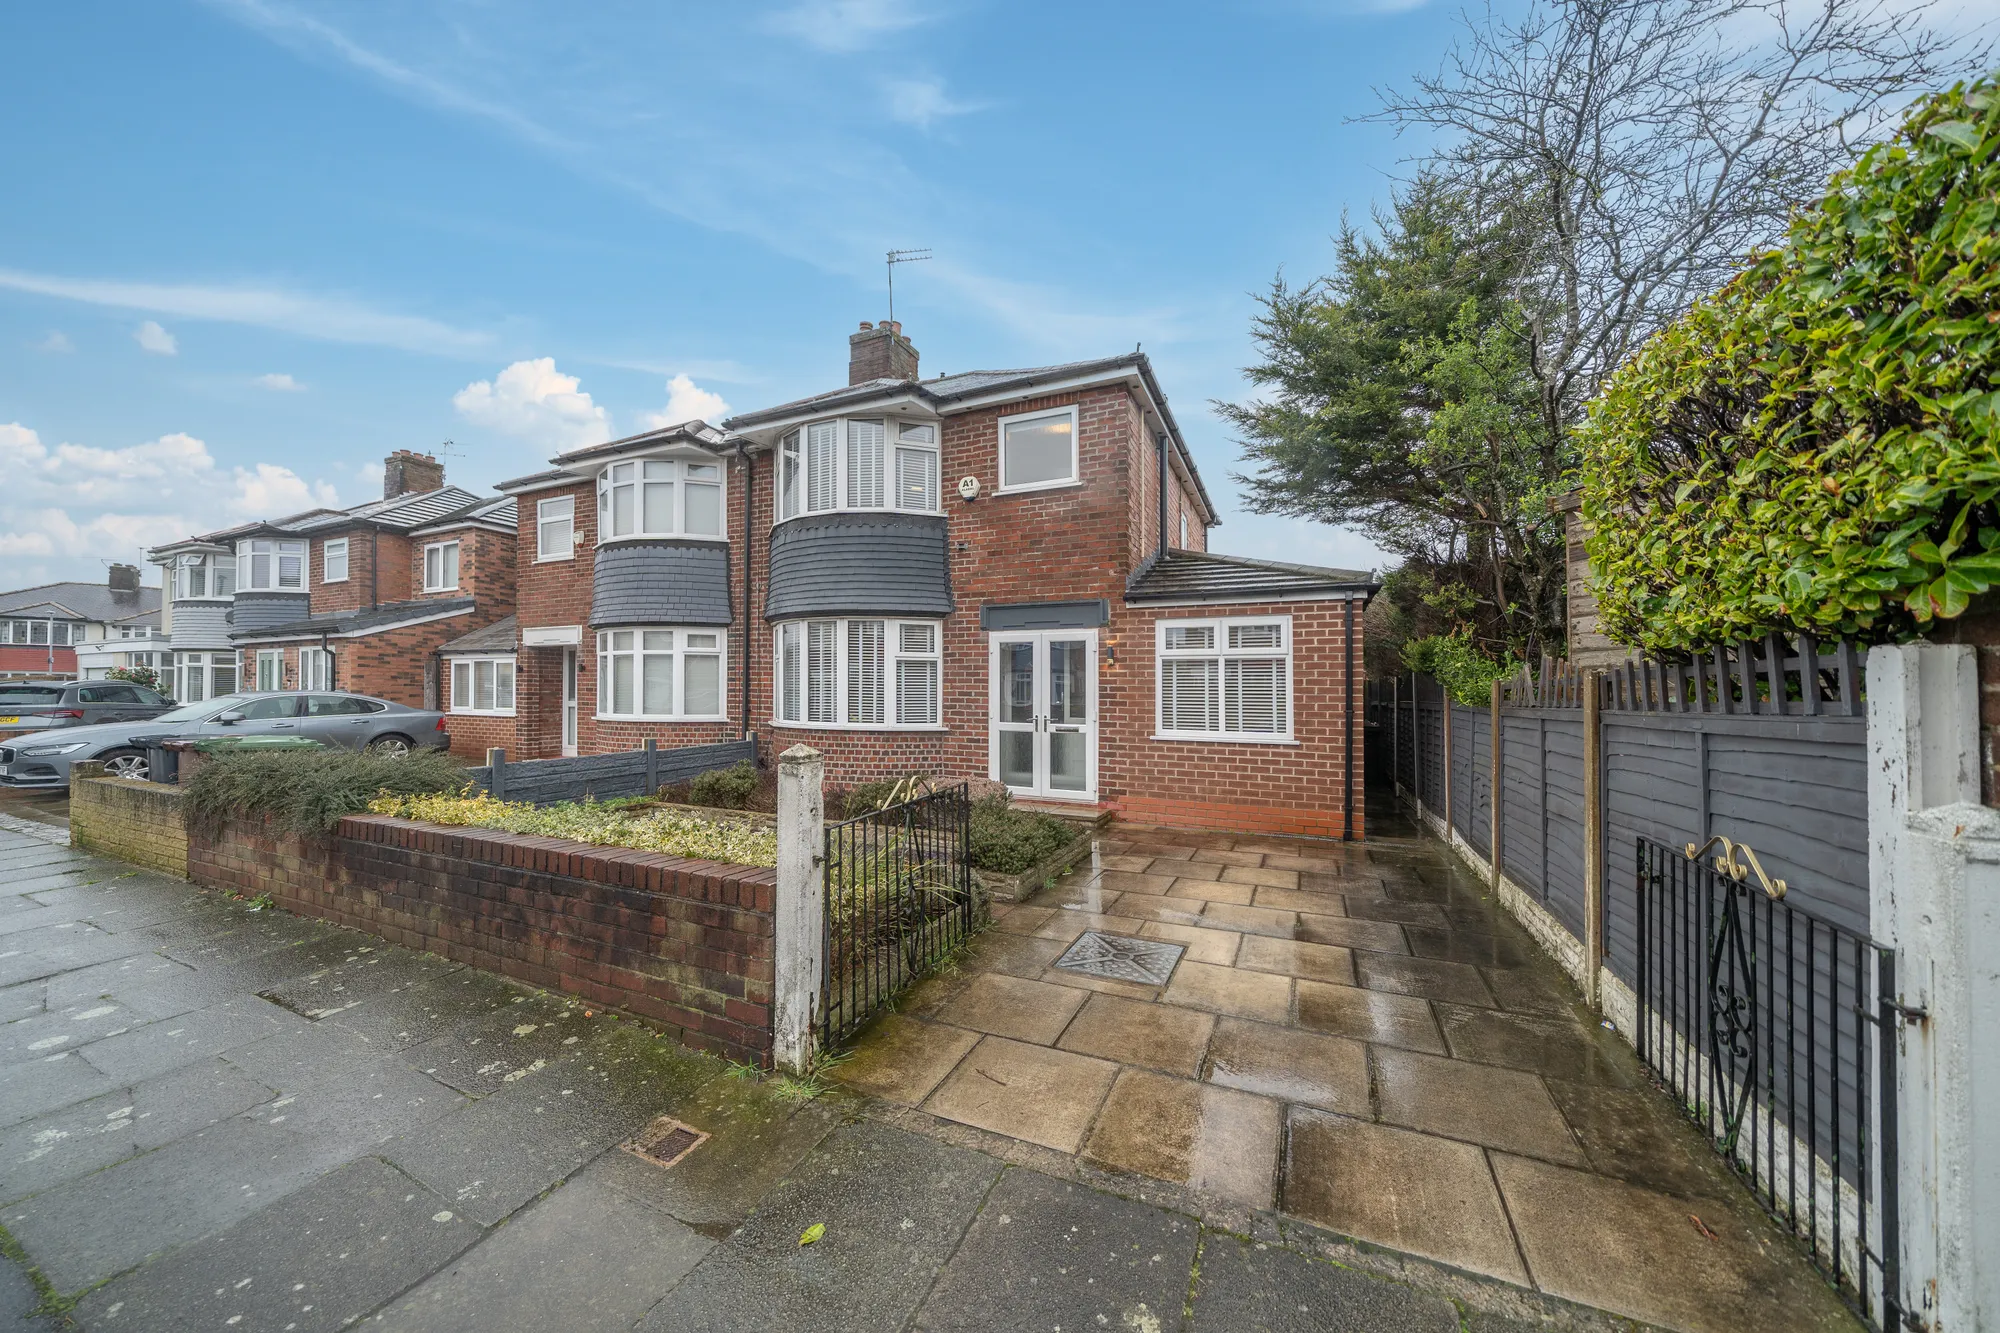 SOLD before market! Thoughtfully extended 3-bed semi-detached in sought-after area. Modern upgrades meet classic charm. Stylish kitchen, cosy bedrooms. Mature outdoor space, off-road parking. Ideal for families. Discover modern living in prime location!